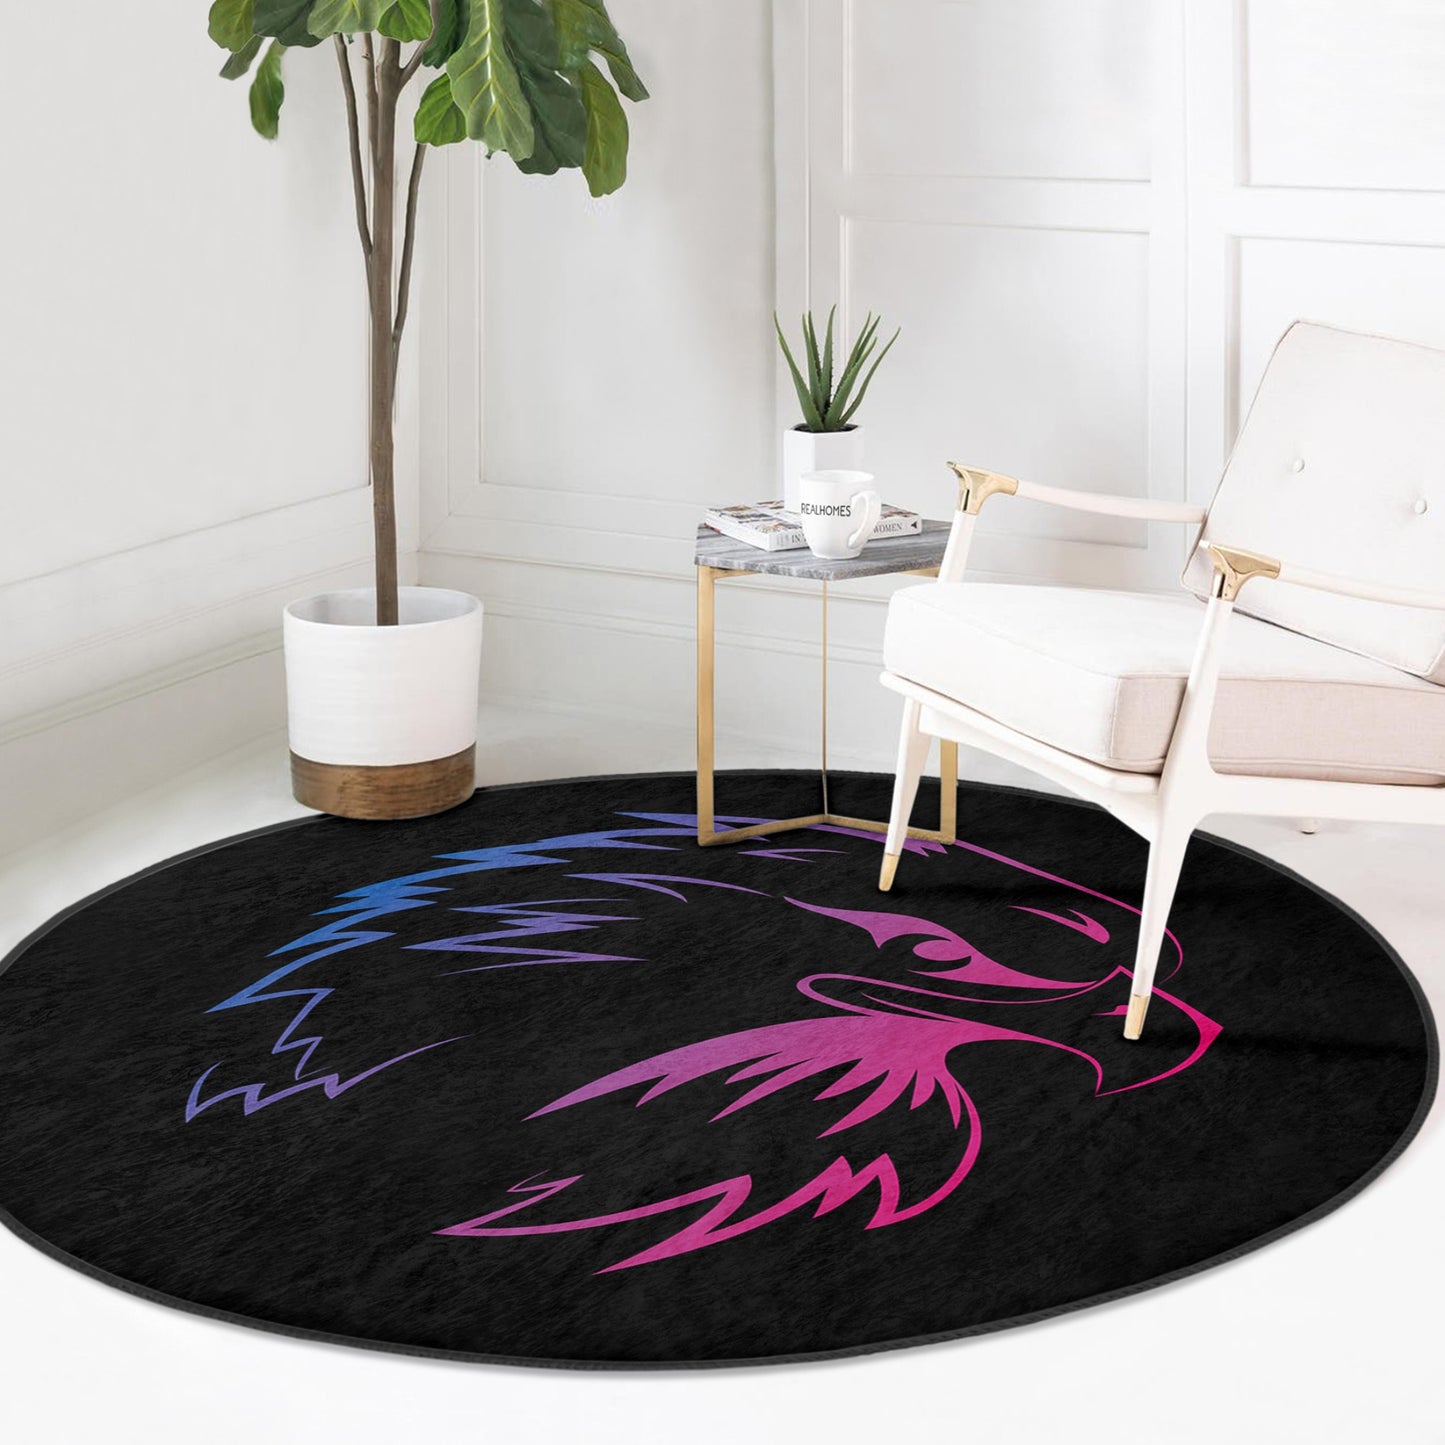 Round Patterned Floor Rug - Gaming Area Accent